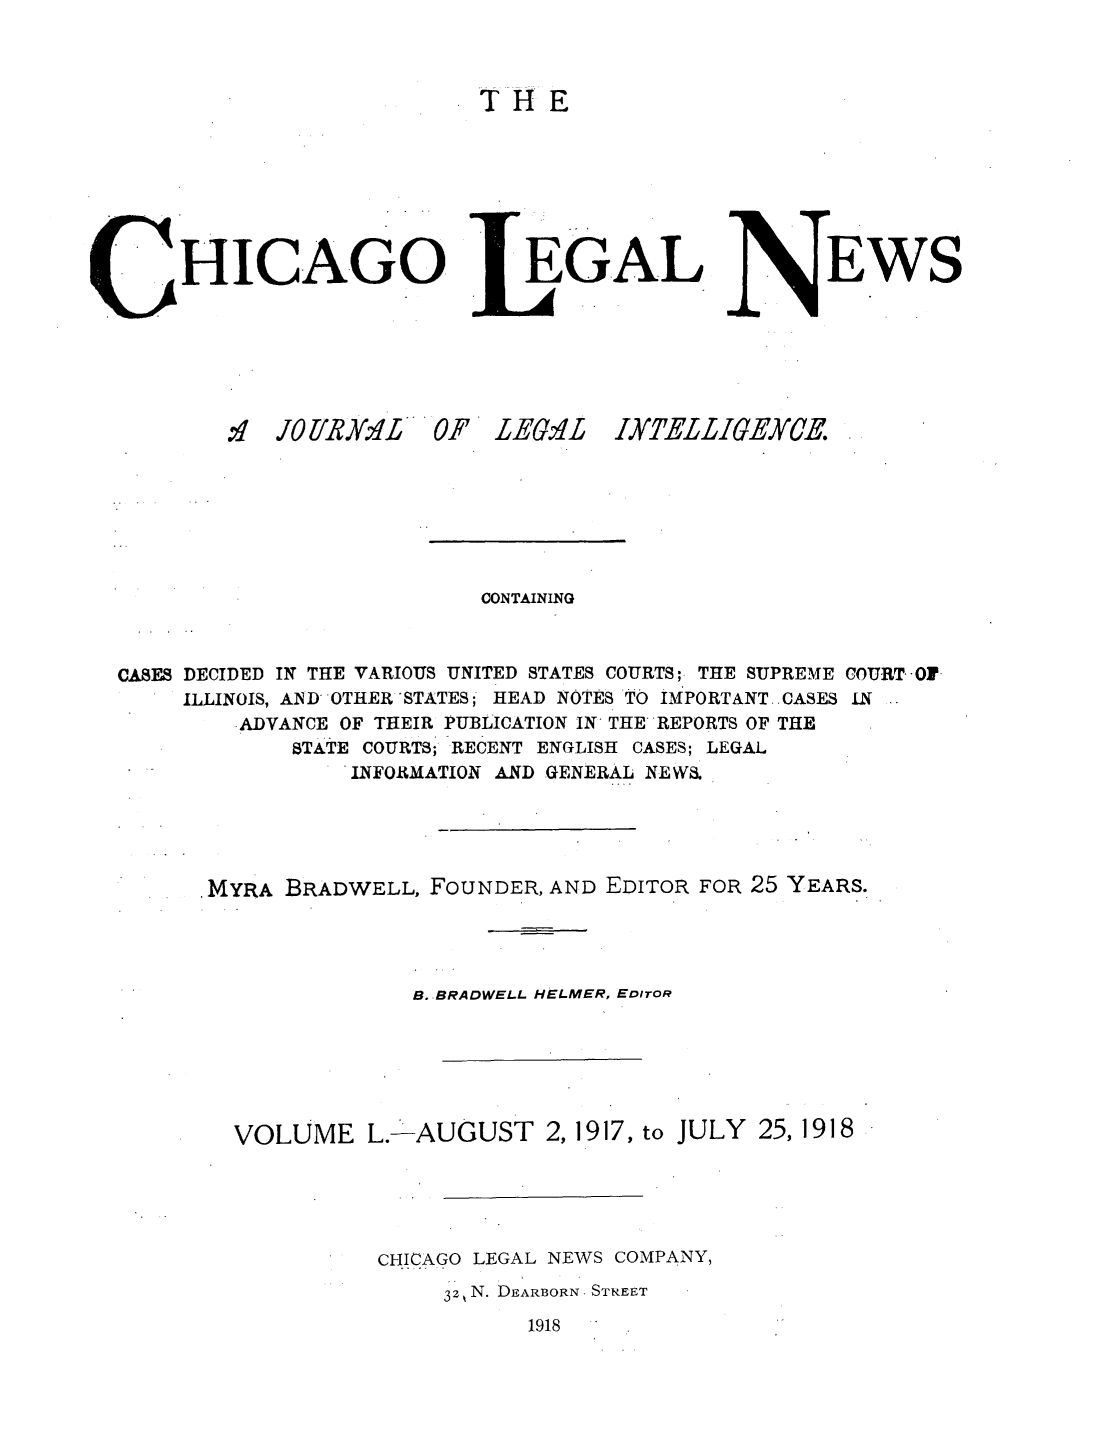 handle is hein.journals/chiclene50 and id is 1 raw text is: THEHICAGOEGALEWS1 JO1 R]'L ''' OF LEG.4LIXTELLIGEYCE.CONTAININGCASES DECIDED IN THE VARIOUS UNITED STATES COURTS; THE SUPREME COURT.-OfILLINOIS, AND OTHER 'STATES; HEAD NOTES TO IMPORTANT ..CASES .NADVANCE OF THEIR PUBLICATION IN THE REPORTS OF THESTATE COURTS; RECENT ENGLISH CASES; LEGALINFORMATION AND GENERAL NEWS.MYRA BRADWELL, FOUNDER, AND EDITOR FOR 25 YEARS.B.-BRADWELL HELMER, EDITORVOLUME L. AUGUST 2, 1917, to JULY 25, 1918CHICAGO LEGAL NEWS COMPANY,32 N. DEARBORN- STREET1918